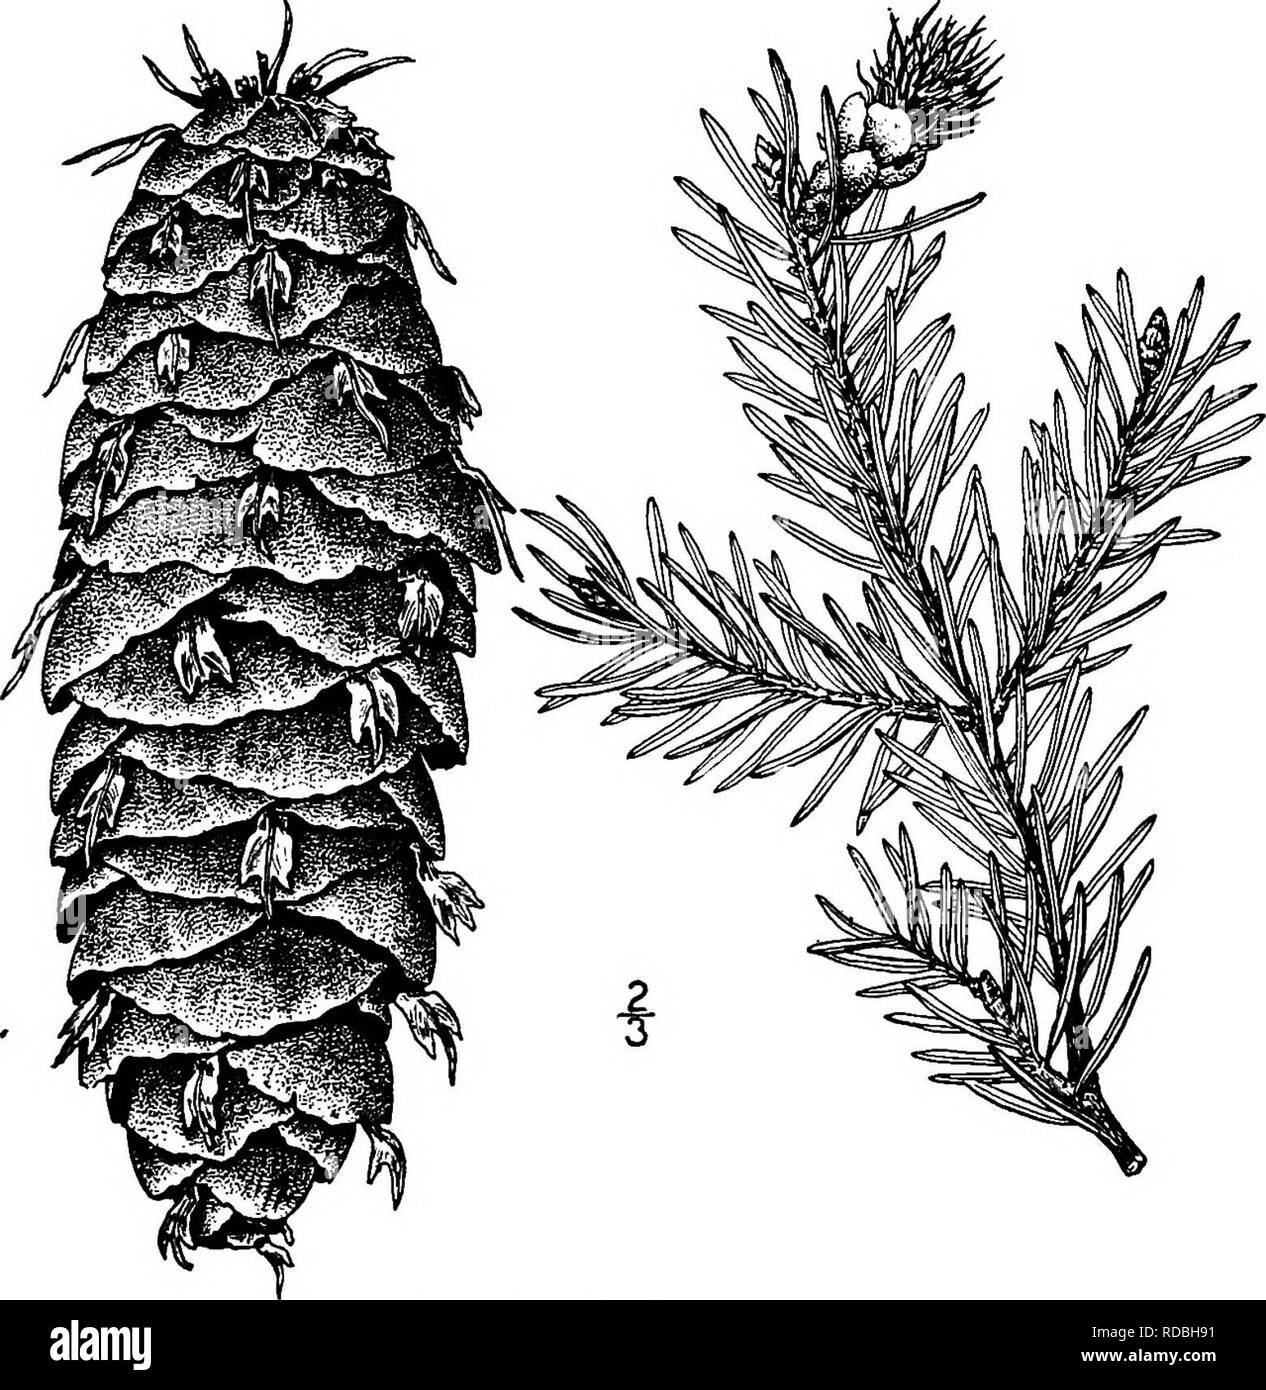 . North American trees : being descriptions and illustrations of the trees growing independently of cultivation in North America, north of Mexico and the West Indies . Trees. 72 The False Hemlocks slope not being so. It now promises to be one of the most desirable coniferous trees for parks, where it sometimes bears fruit when scarcely 2 meters taU. 2. BIG CONE SPRUCE — Psendotsnga macrocarpa (Torrey) Mayr Abies Douglasii macrocarpa Torrey This tree, which is also called Big-cone Douglas spruce, California hemlock, and Hemlock, is of very local occurrence, being known only from dry mountains i Stock Photo